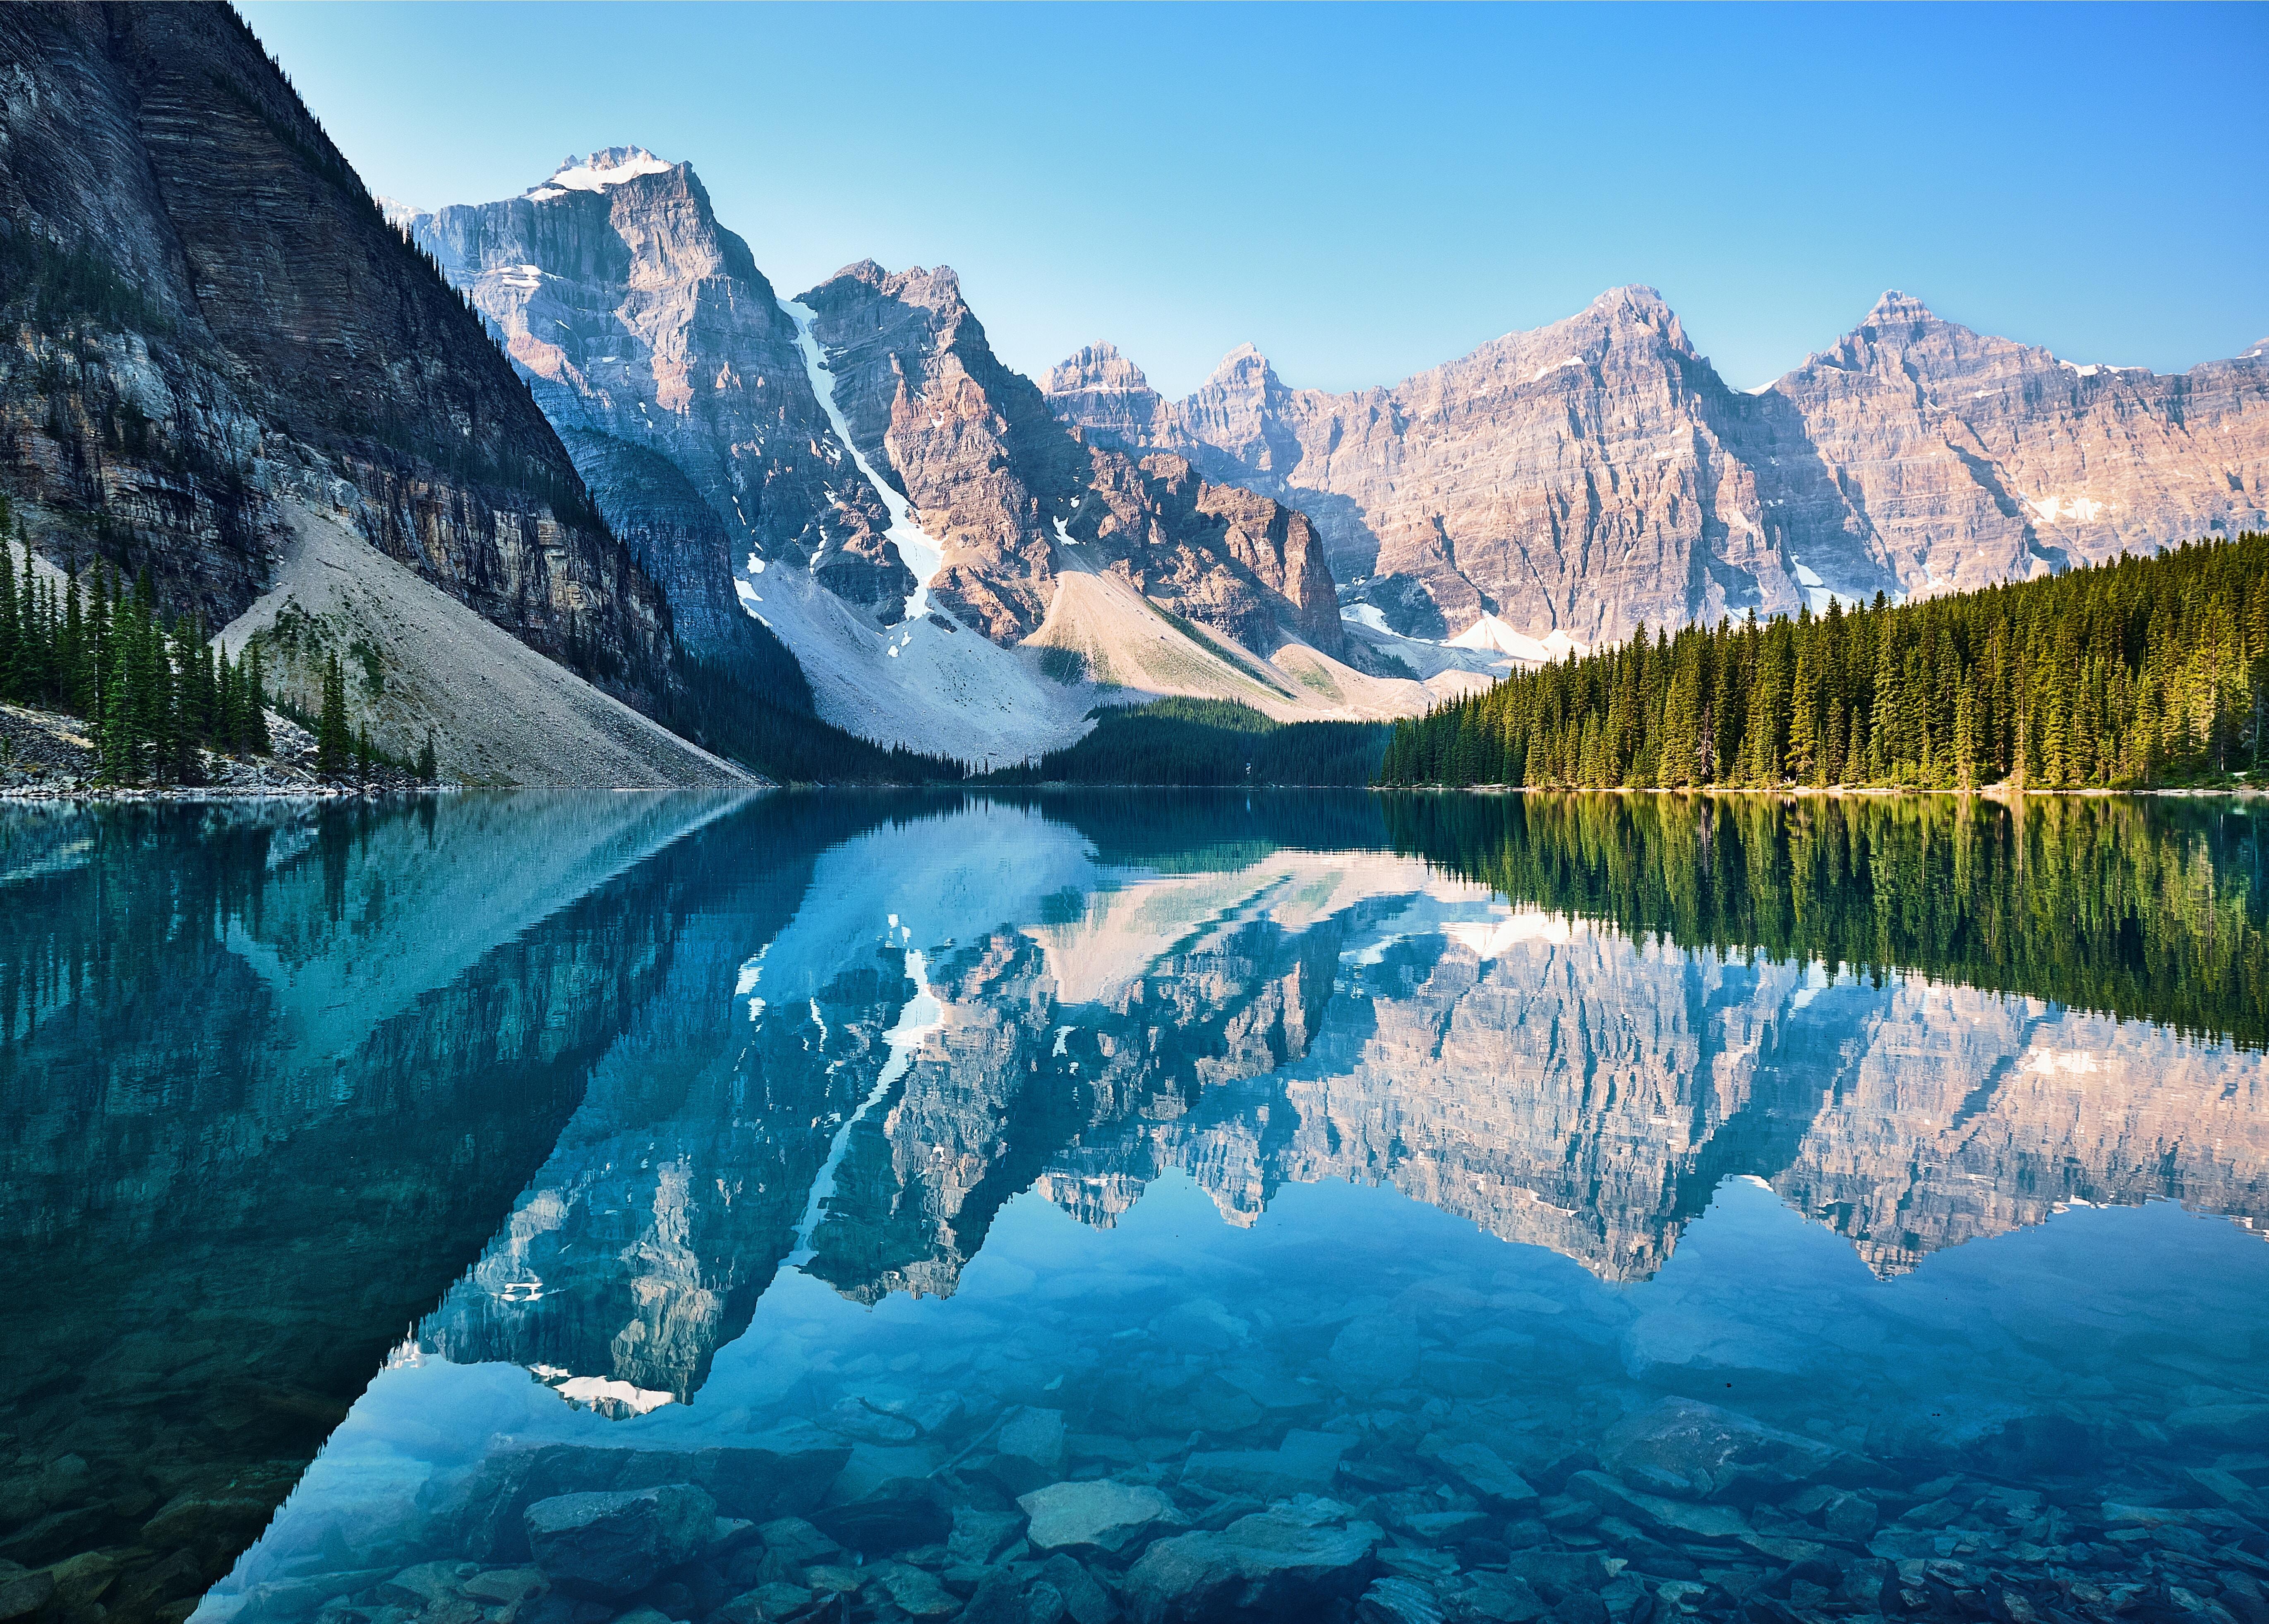 Beautiful Banff Picture. Download Free Image